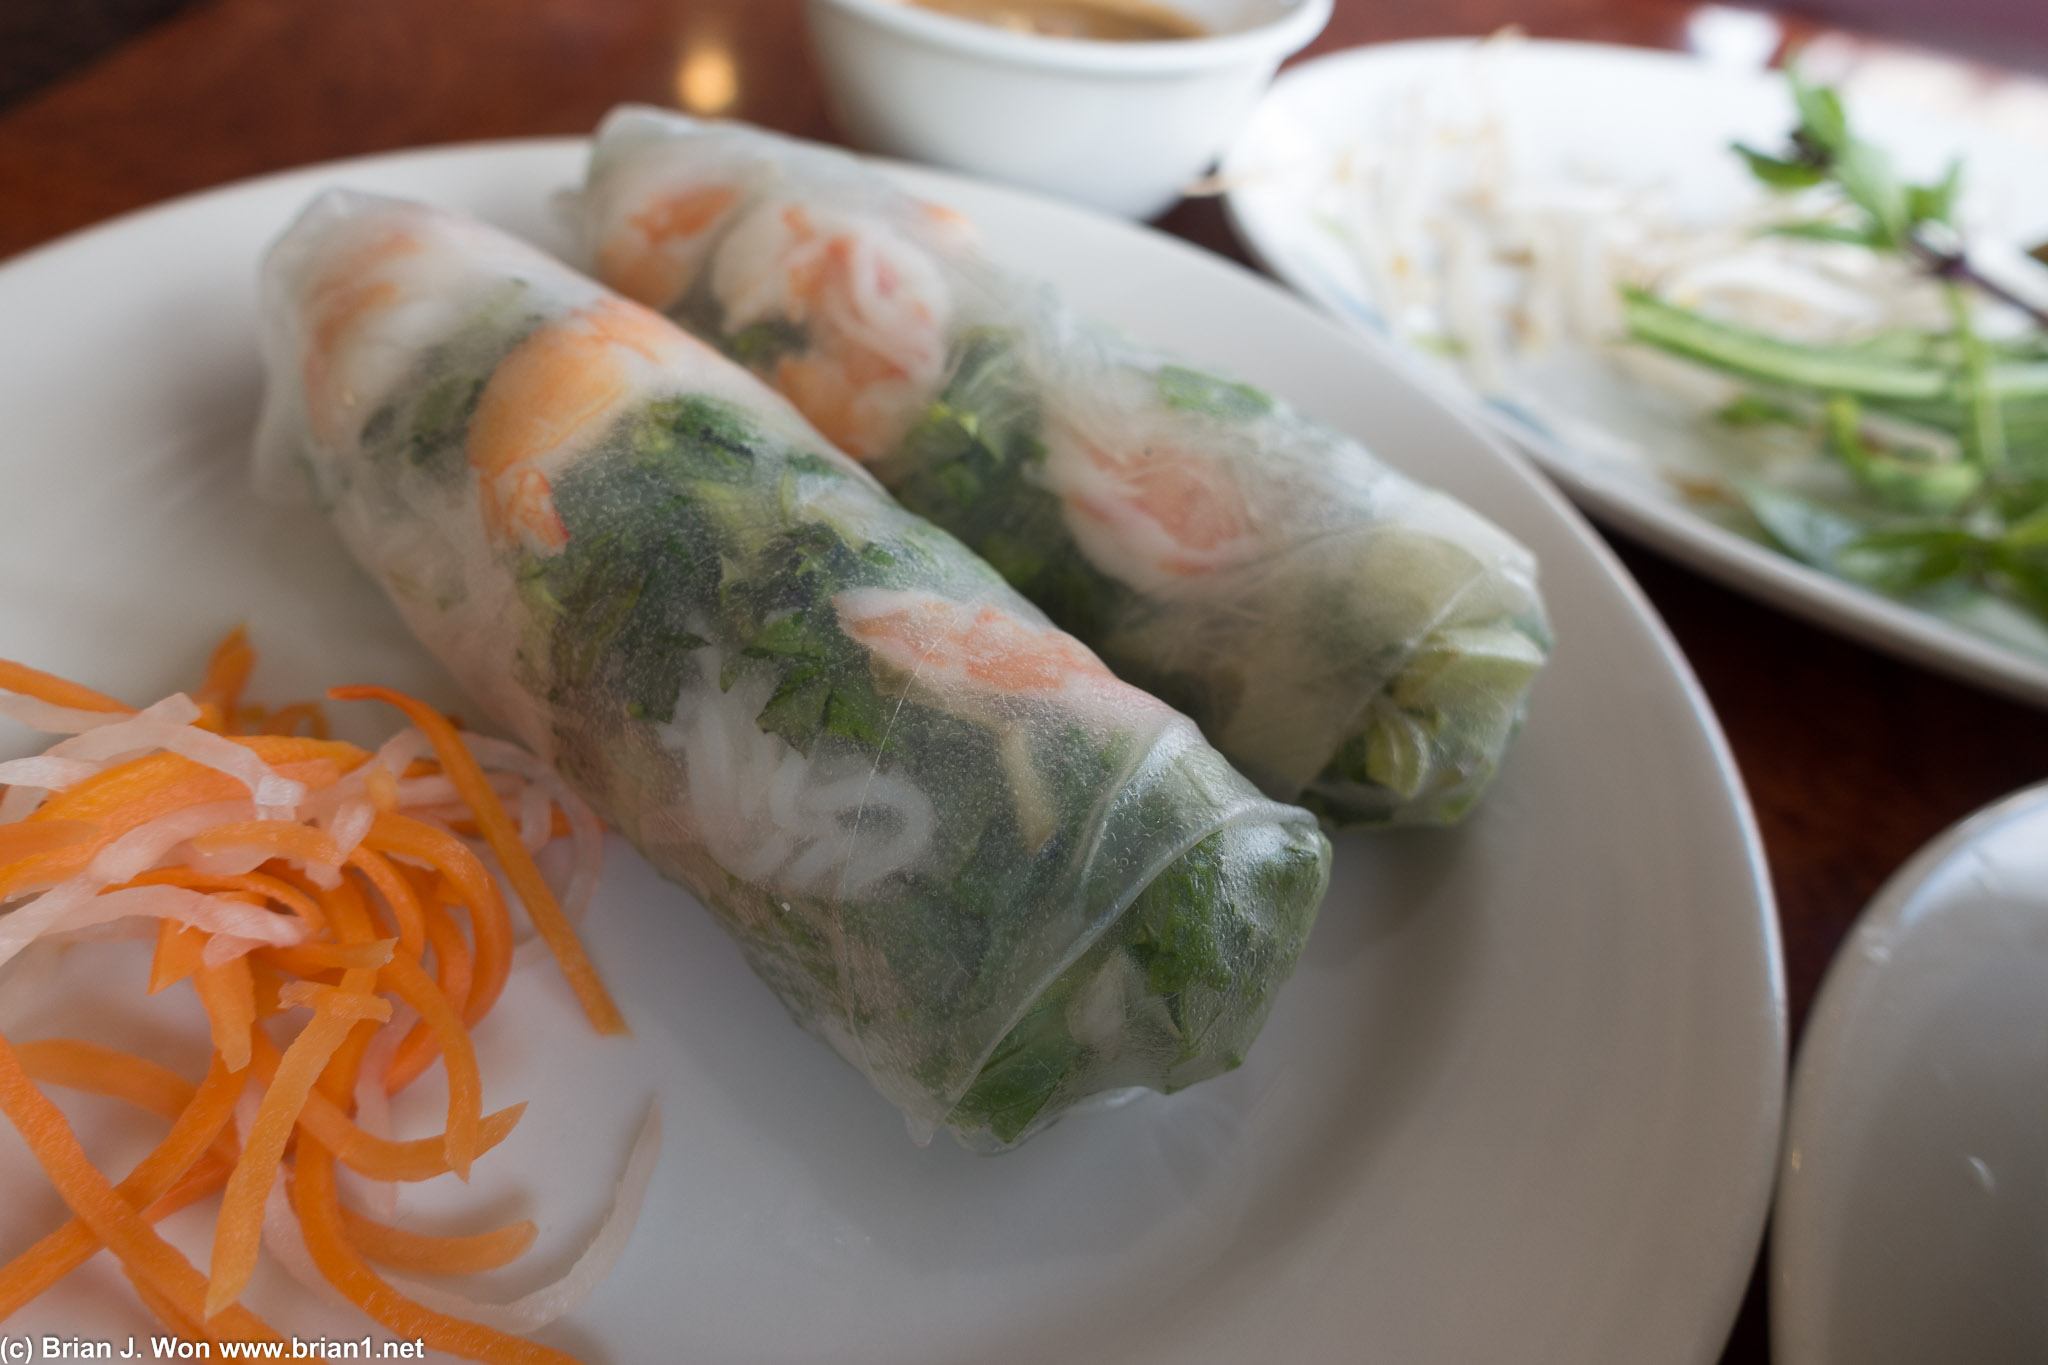 Spring rolls were not good, at least not to compete in Westminster.